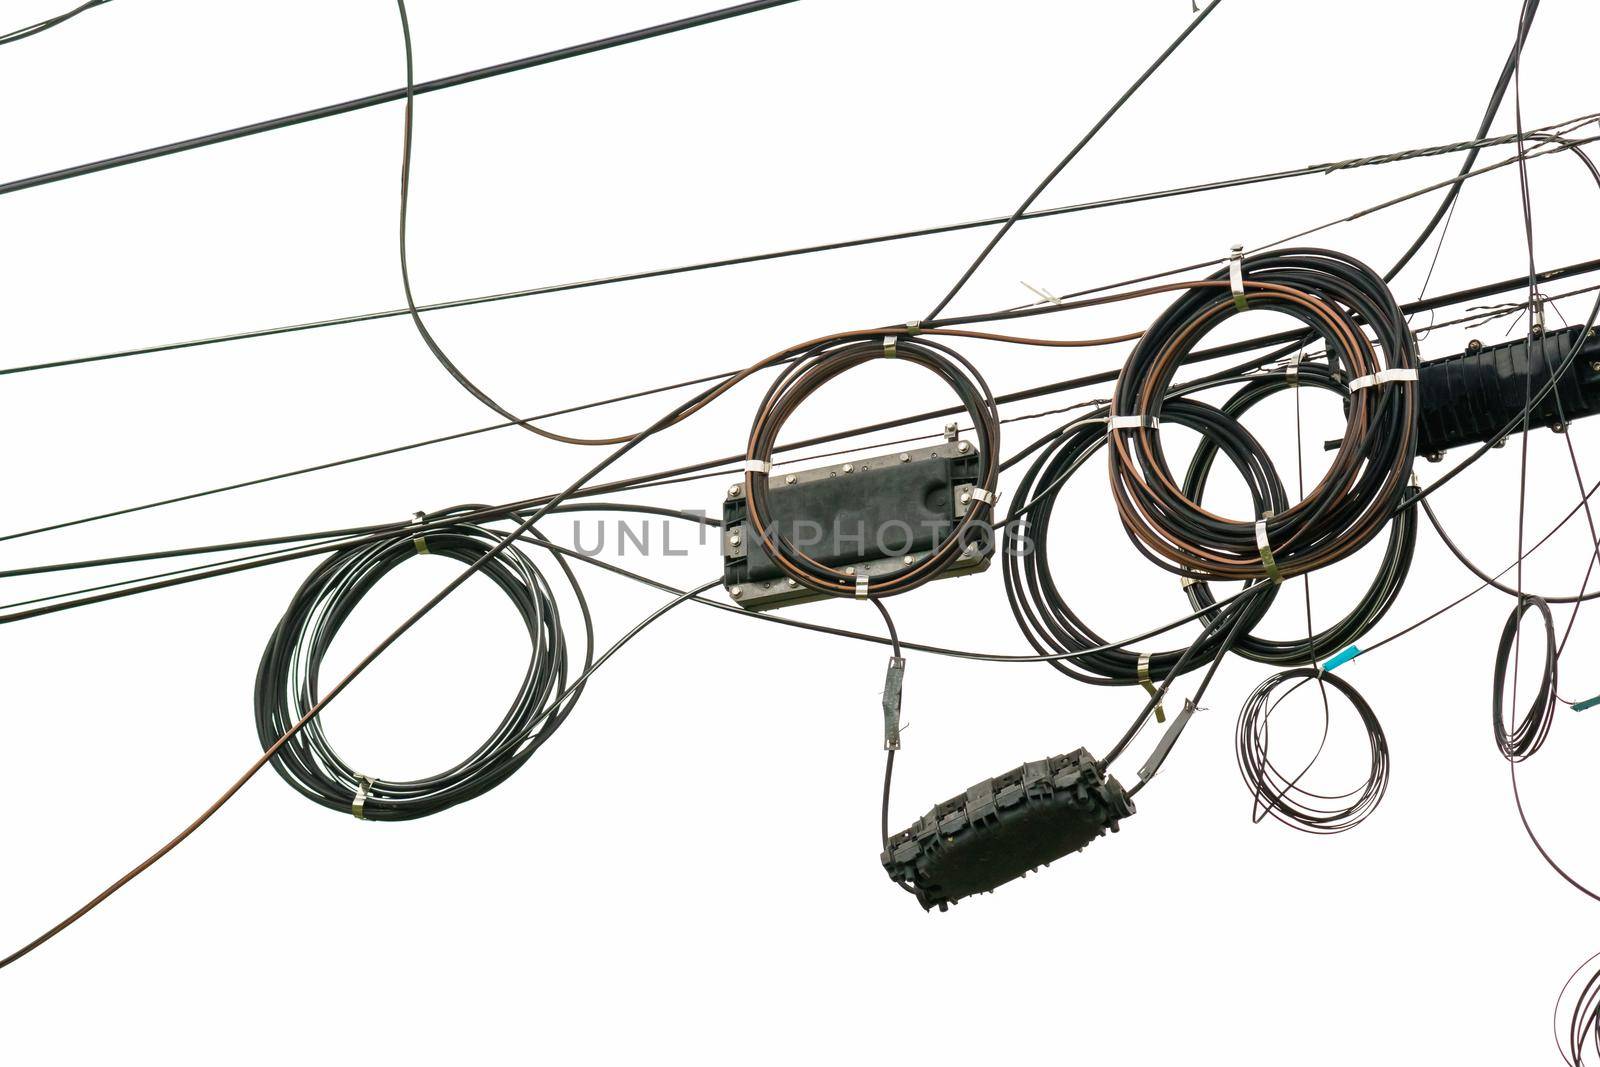 Cable wires on the electric poles are tangled on white  background , Bangkok Thailand.